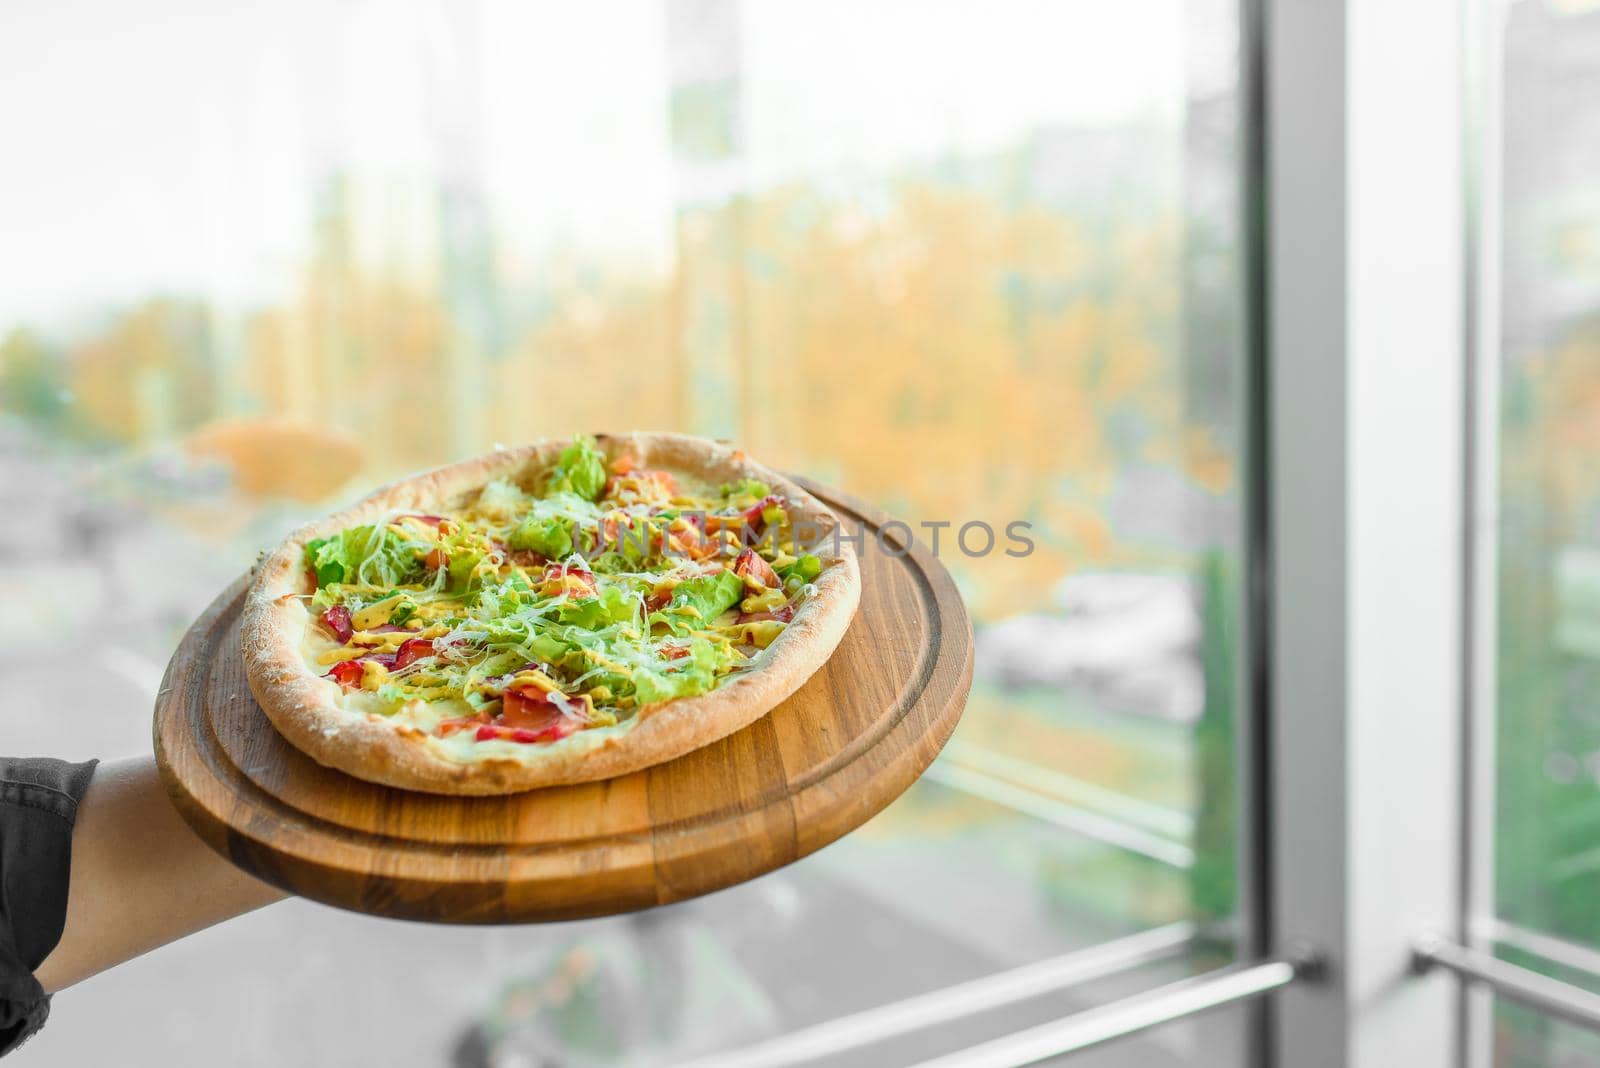 Delicious fresh italian pizza with ham, salami, tomatoes, salad and parmesan on a wooden board against the background of a window.